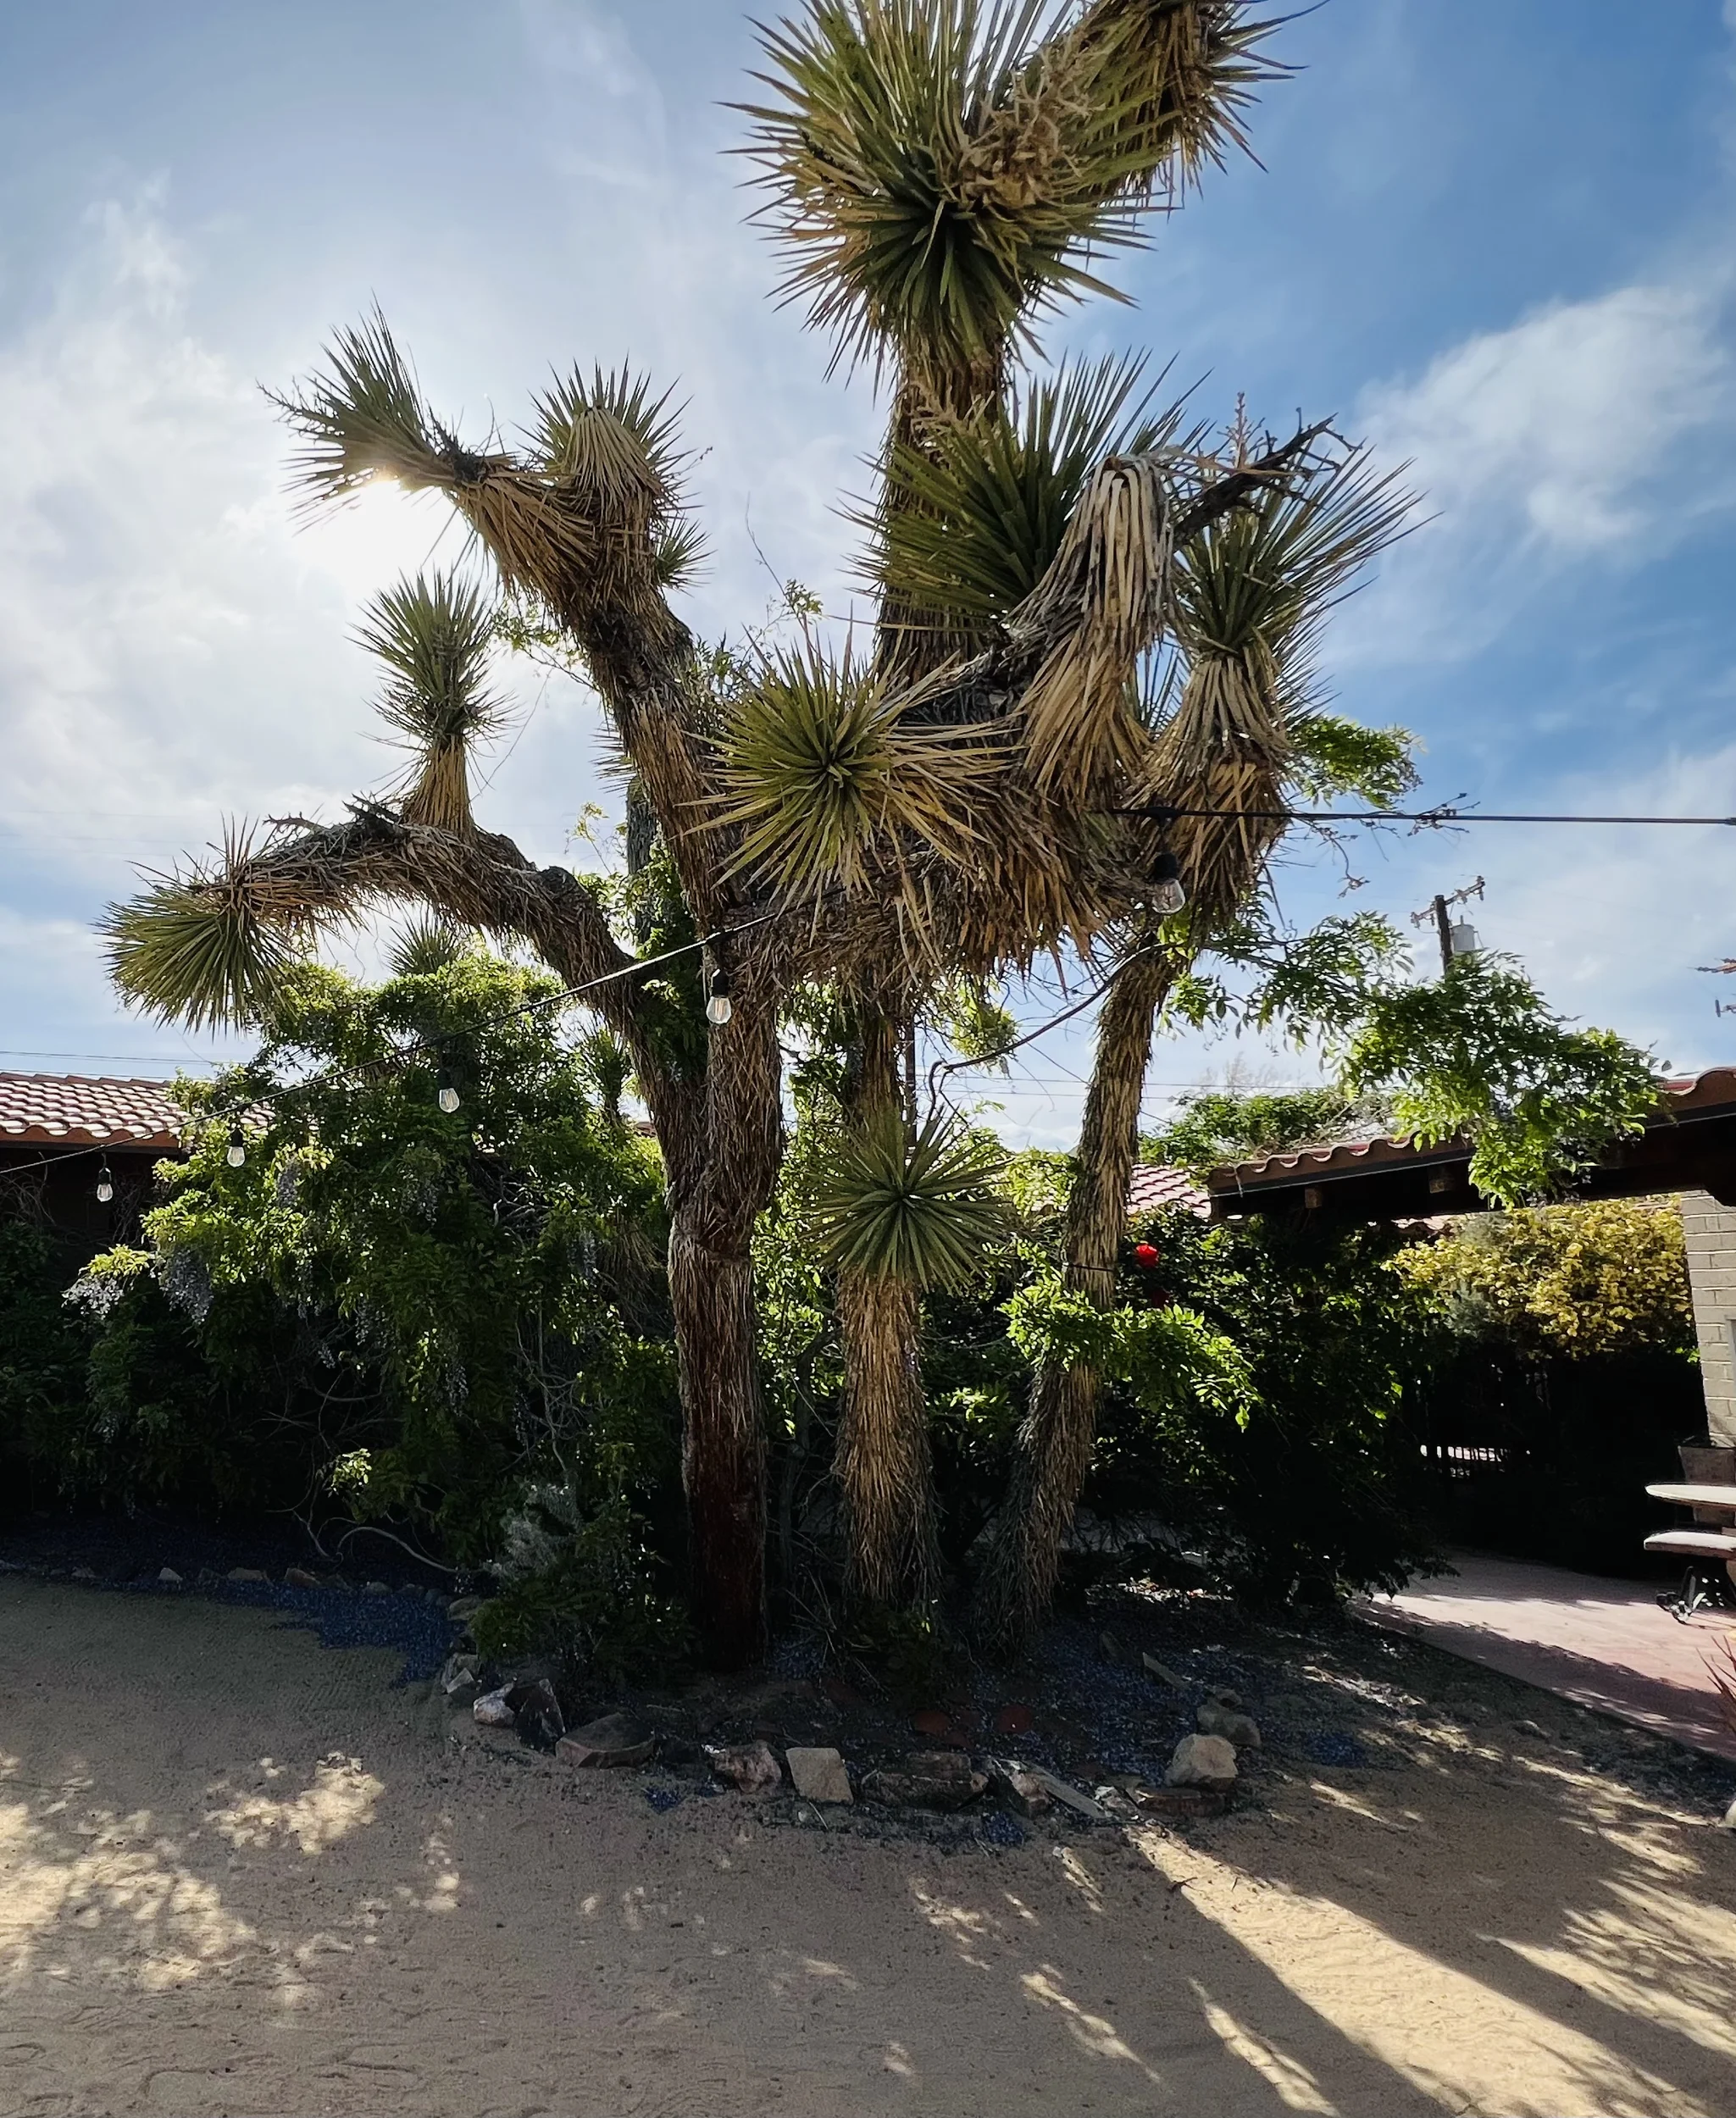 A courtyard with a large joshua tree.